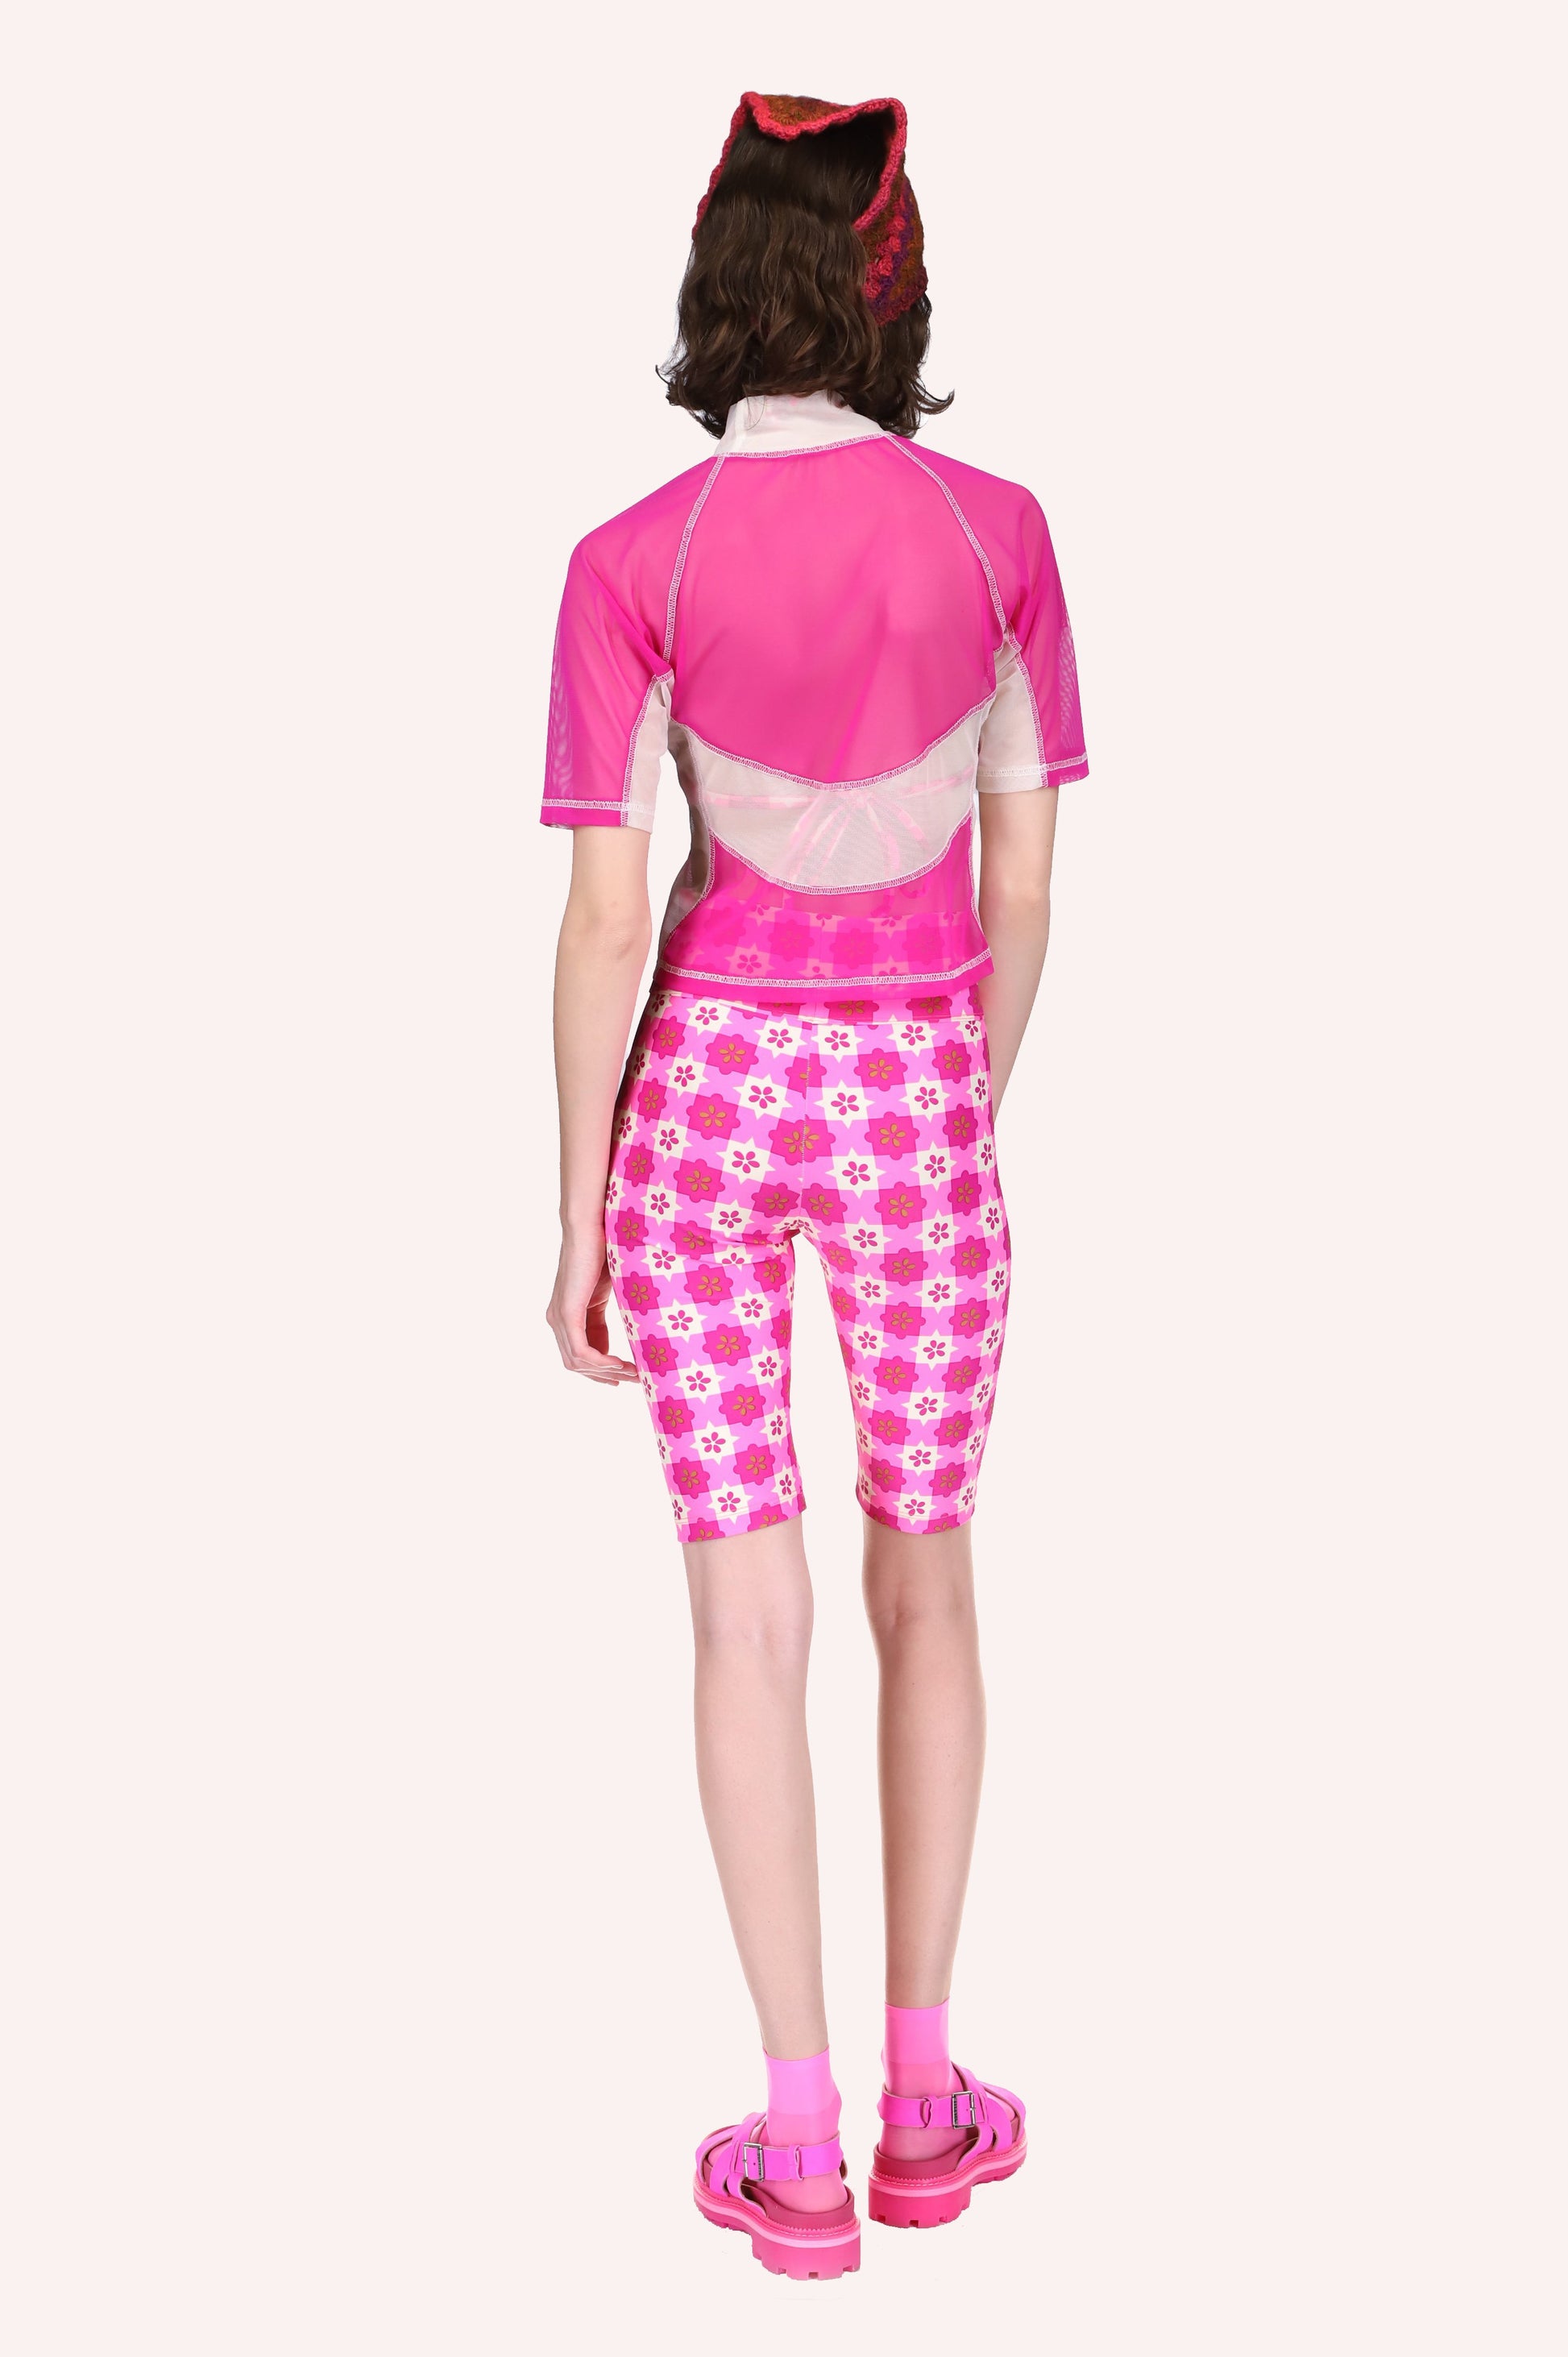 Gingham Bike Shorts Neon Pink features a pink light and dark and white star-shaped pattern